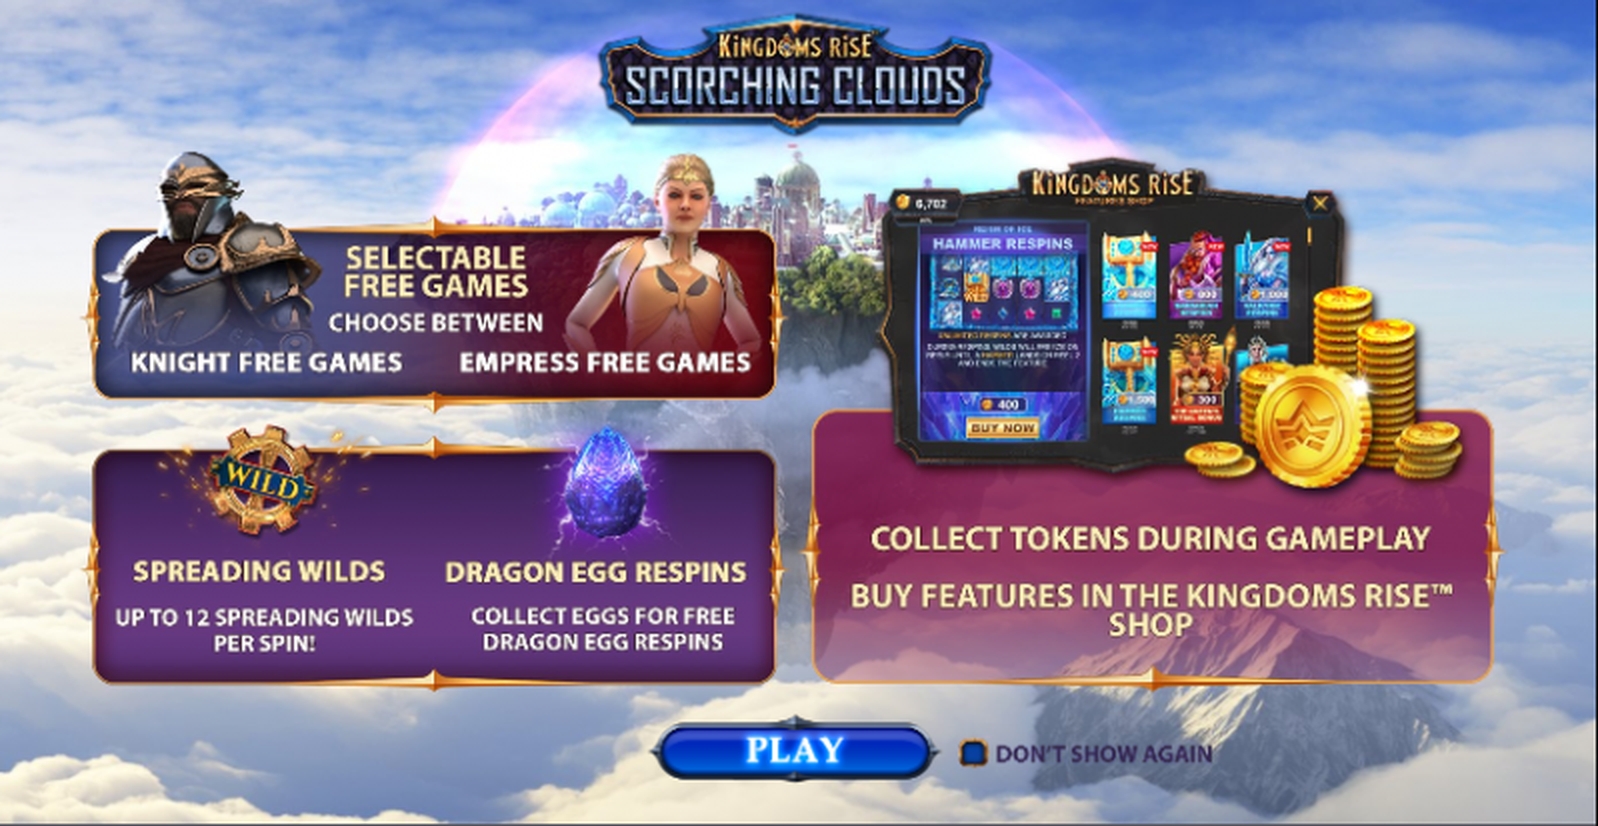 Kingdoms Rise: Scorching Clouds demo